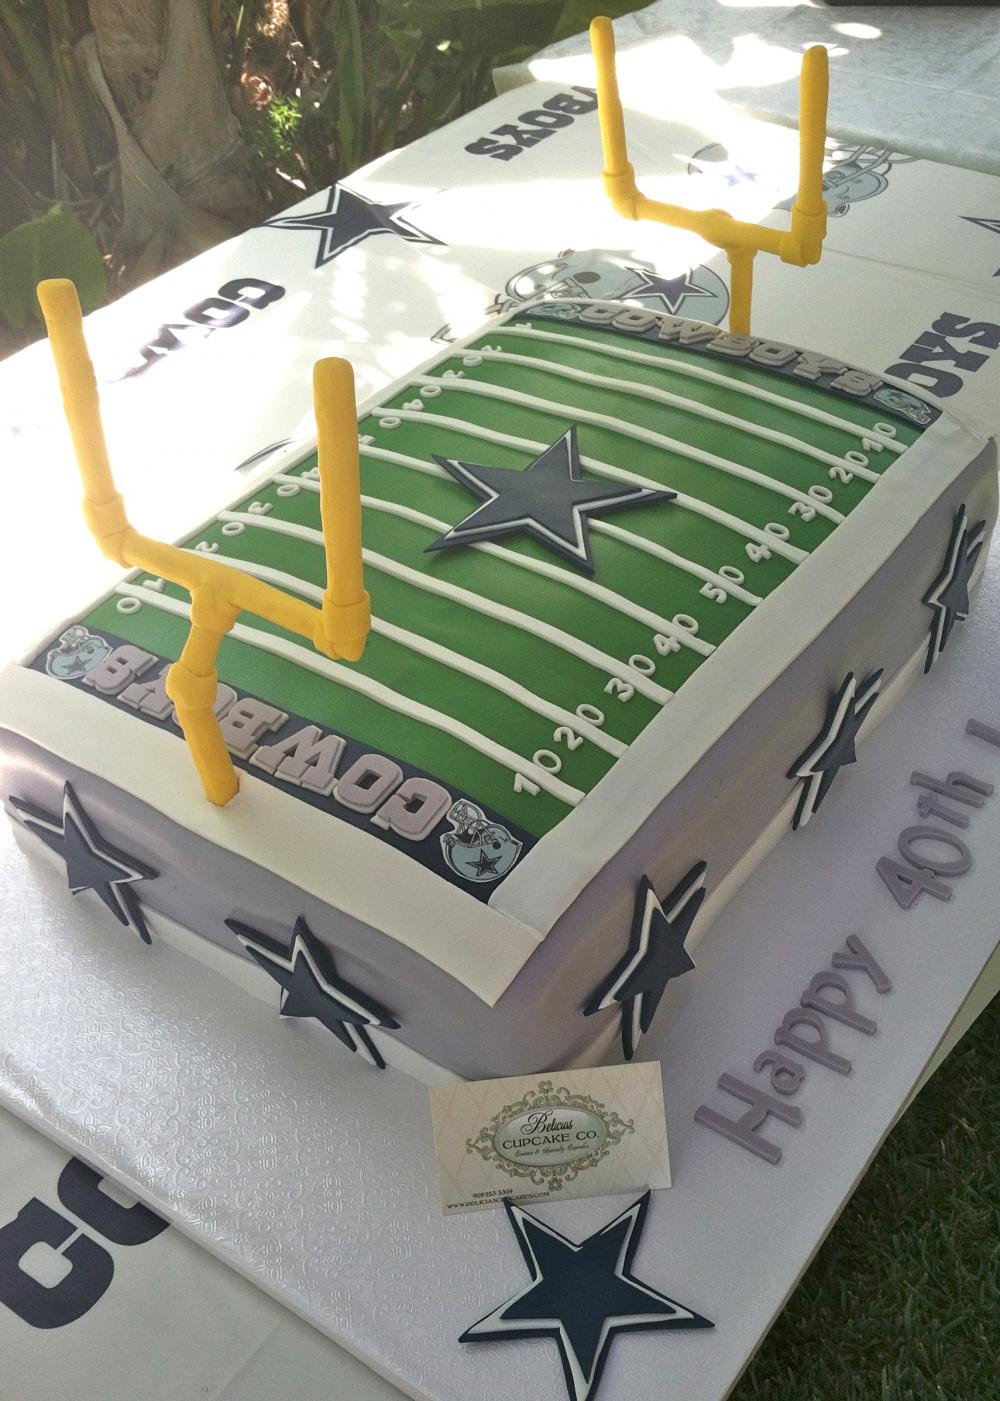 Fondant Football Field Includes 2 Field Goals, 2 End Zone Team Names, 4 Icing Image Helmets, 2 Icing Images Green For Field,yard Numbers